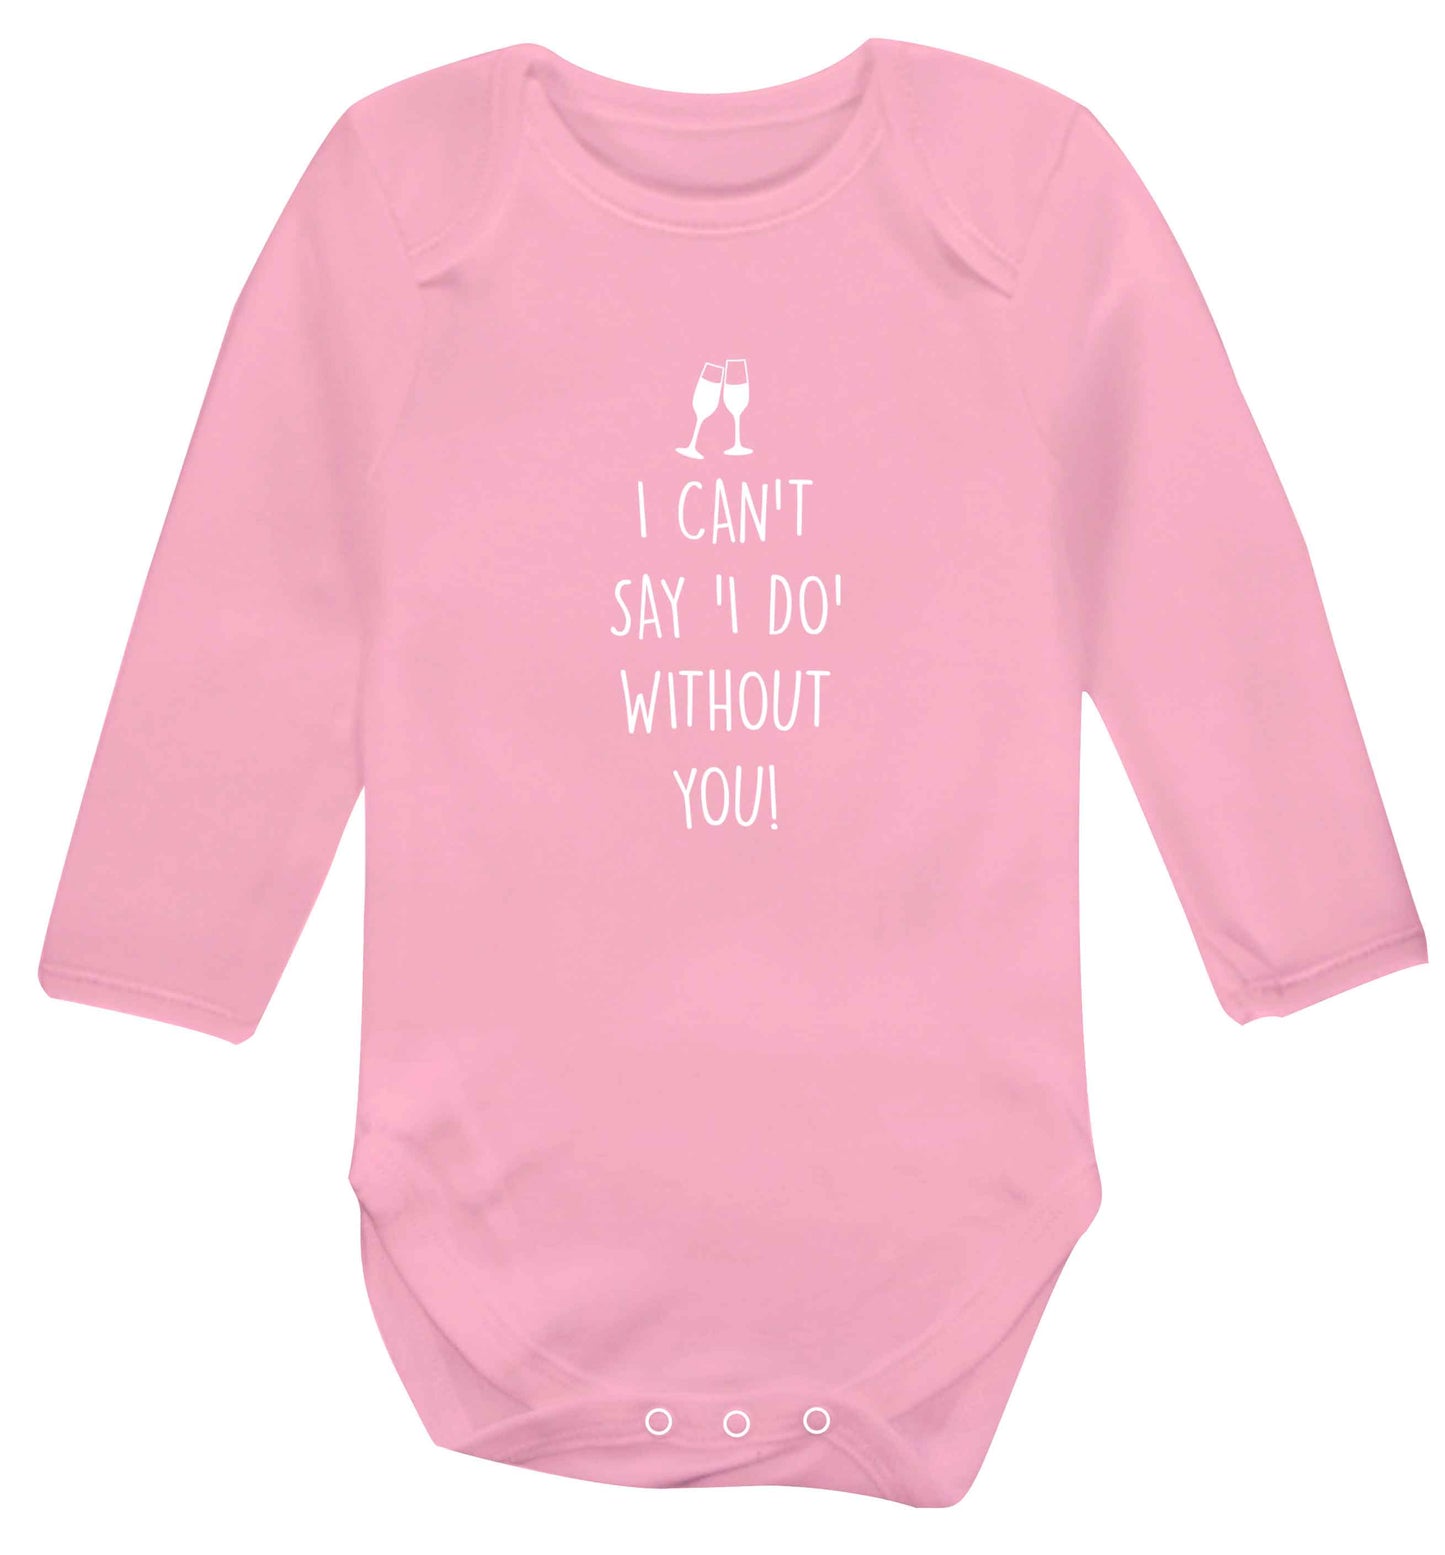 I can't say 'I do' without you! baby vest long sleeved pale pink 6-12 months